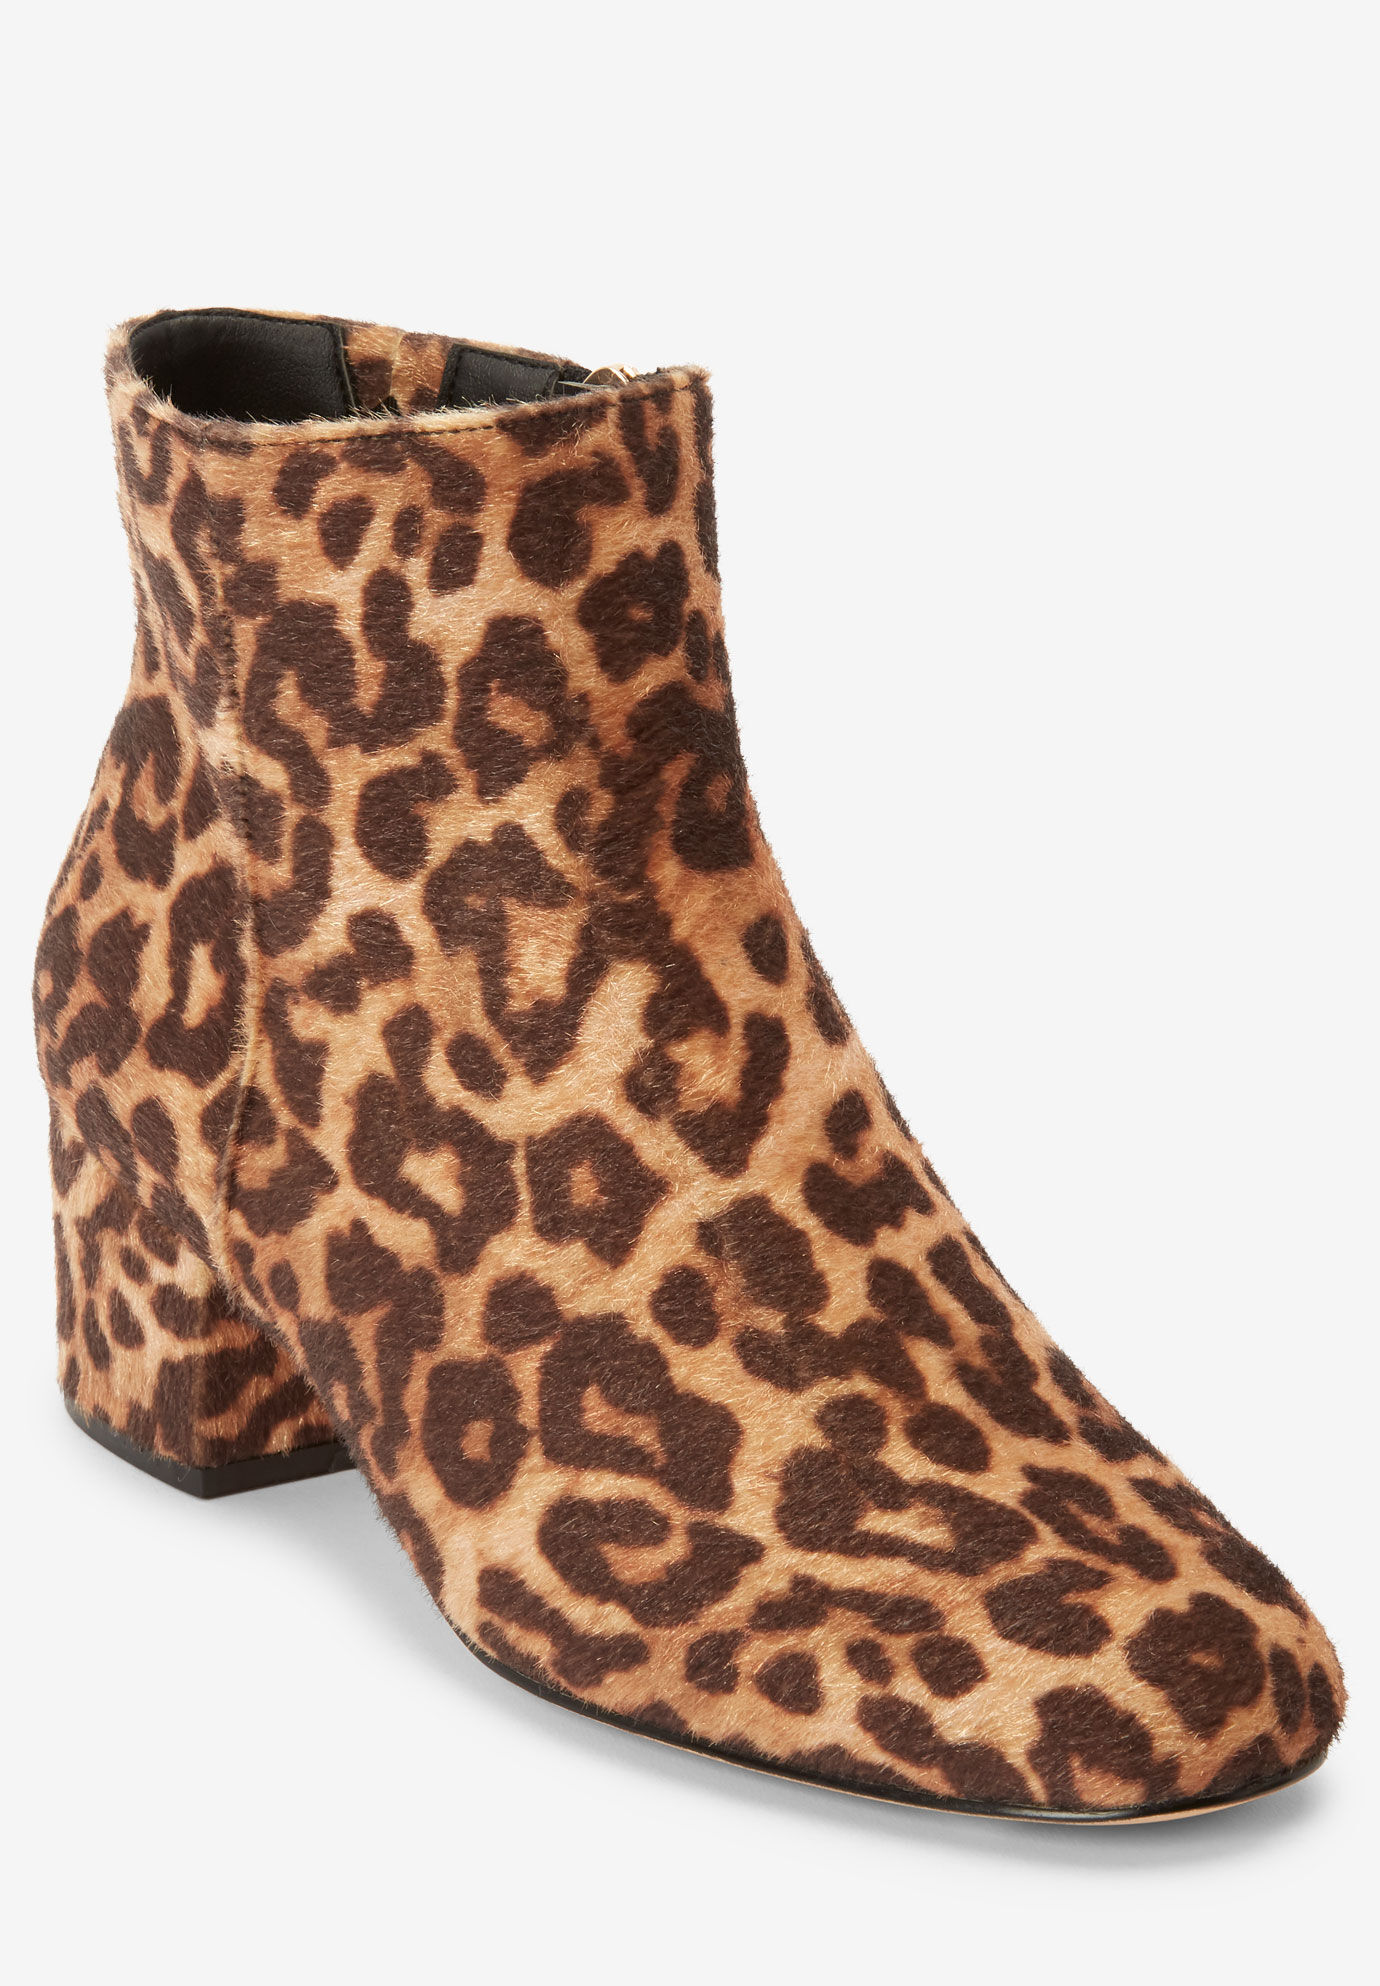 Wide Width Boots for Women | Jessica London